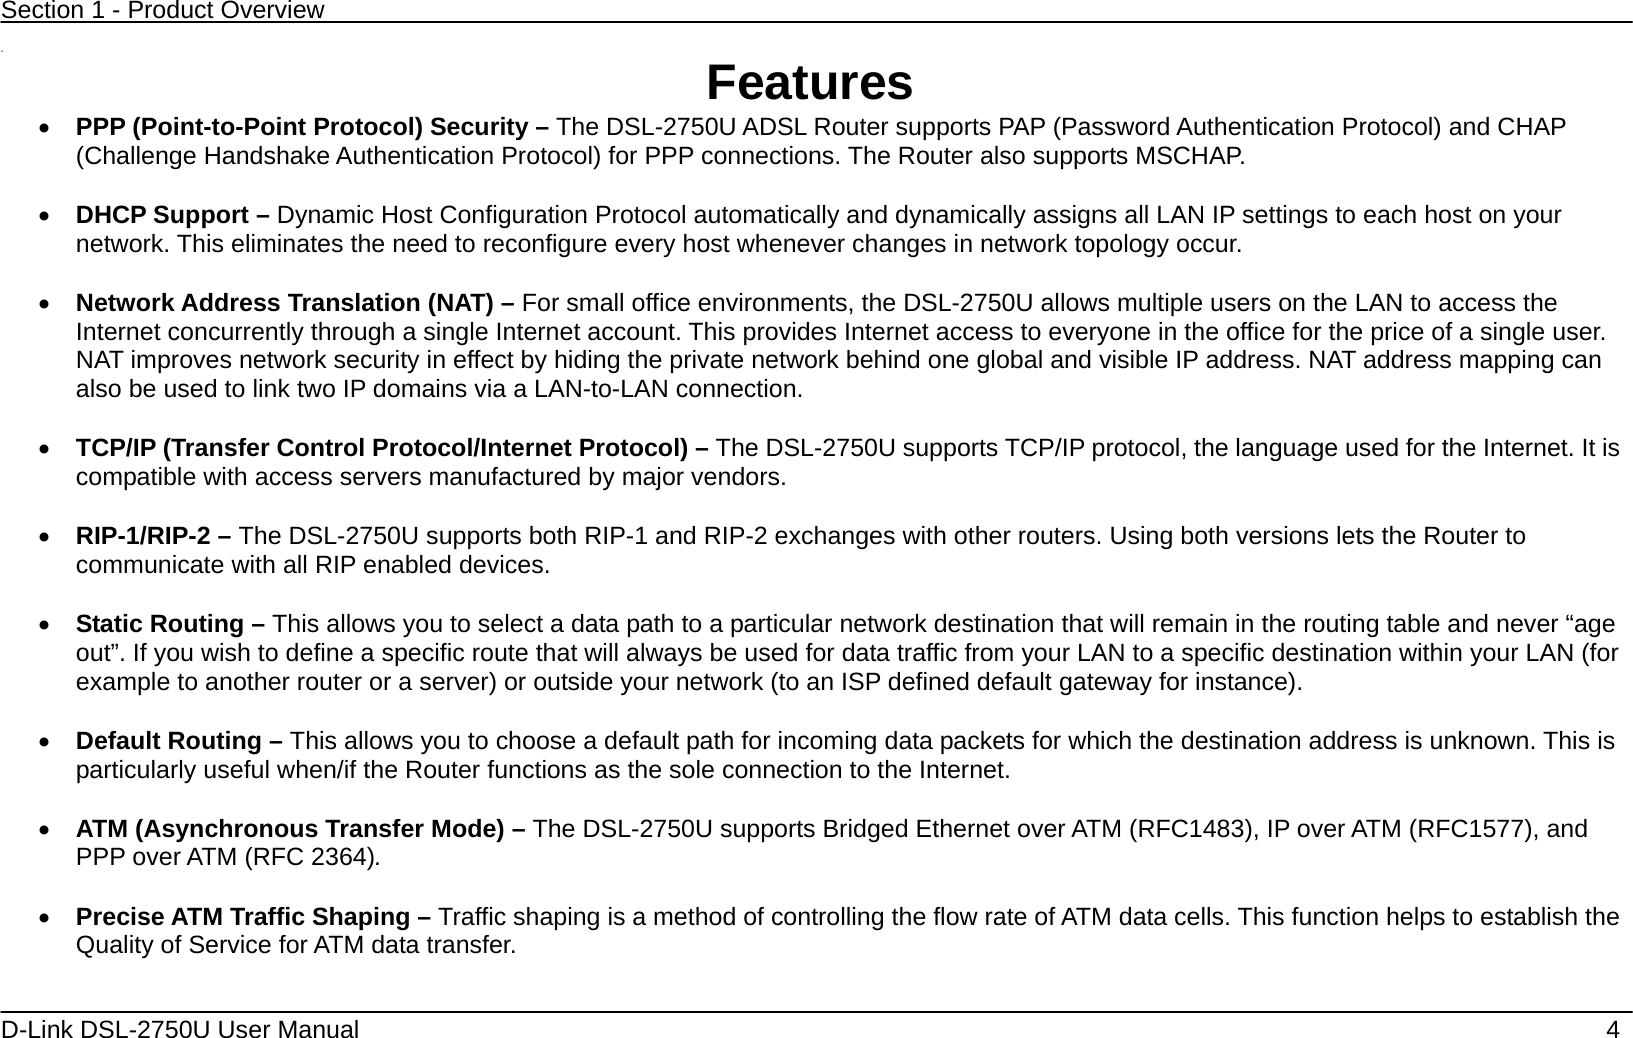 Section 1 - Product Overview  D-Link DSL-2750U User Manual    4  11  Features  PPP (Point-to-Point Protocol) Security – The DSL-2750U ADSL Router supports PAP (Password Authentication Protocol) and CHAP (Challenge Handshake Authentication Protocol) for PPP connections. The Router also supports MSCHAP.   DHCP Support – Dynamic Host Configuration Protocol automatically and dynamically assigns all LAN IP settings to each host on your network. This eliminates the need to reconfigure every host whenever changes in network topology occur.   Network Address Translation (NAT) – For small office environments, the DSL-2750U allows multiple users on the LAN to access the Internet concurrently through a single Internet account. This provides Internet access to everyone in the office for the price of a single user. NAT improves network security in effect by hiding the private network behind one global and visible IP address. NAT address mapping can also be used to link two IP domains via a LAN-to-LAN connection.   TCP/IP (Transfer Control Protocol/Internet Protocol) – The DSL-2750U supports TCP/IP protocol, the language used for the Internet. It is compatible with access servers manufactured by major vendors.   RIP-1/RIP-2 – The DSL-2750U supports both RIP-1 and RIP-2 exchanges with other routers. Using both versions lets the Router to communicate with all RIP enabled devices.   Static Routing – This allows you to select a data path to a particular network destination that will remain in the routing table and never “age out”. If you wish to define a specific route that will always be used for data traffic from your LAN to a specific destination within your LAN (for example to another router or a server) or outside your network (to an ISP defined default gateway for instance).      Default Routing – This allows you to choose a default path for incoming data packets for which the destination address is unknown. This is particularly useful when/if the Router functions as the sole connection to the Internet.   ATM (Asynchronous Transfer Mode) – The DSL-2750U supports Bridged Ethernet over ATM (RFC1483), IP over ATM (RFC1577), and PPP over ATM (RFC 2364).     Precise ATM Traffic Shaping – Traffic shaping is a method of controlling the flow rate of ATM data cells. This function helps to establish the Quality of Service for ATM data transfer.  